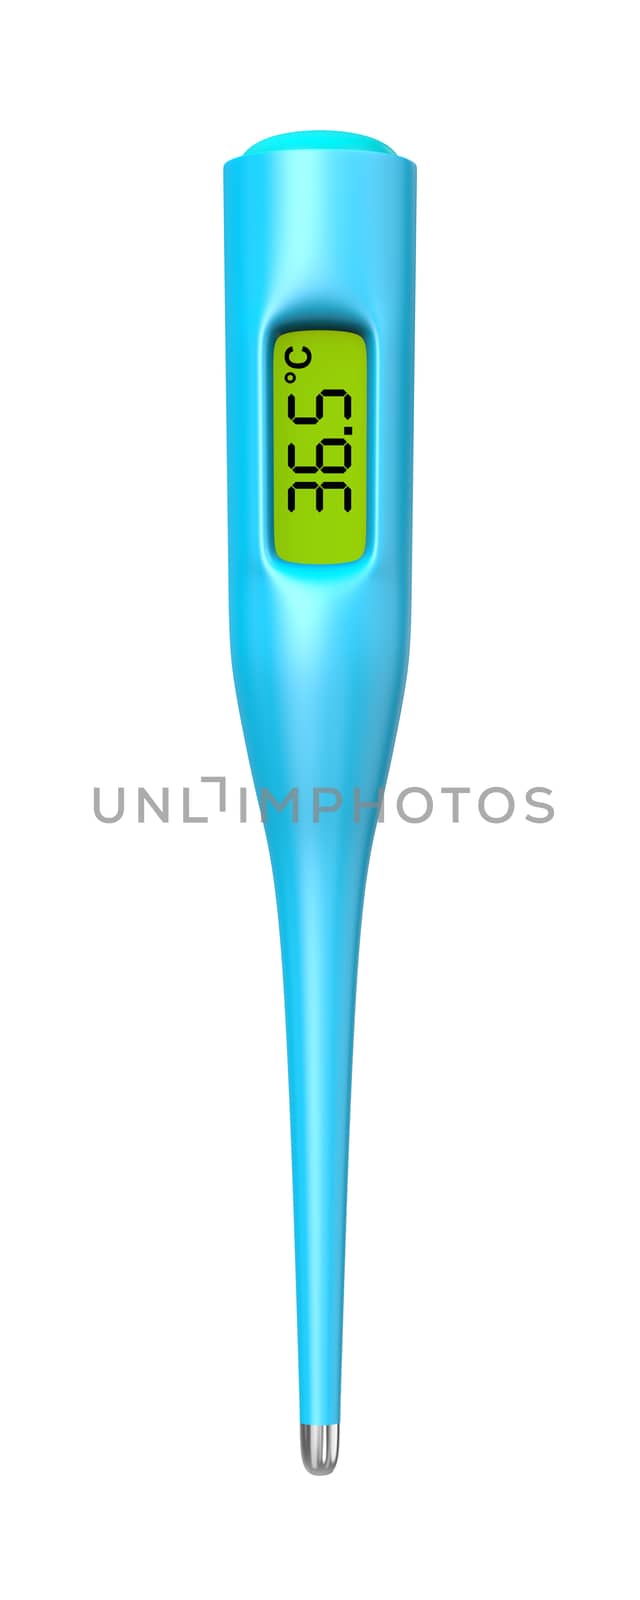 Clinical Digital Thermometer Isolated on White Background 3D Illustration